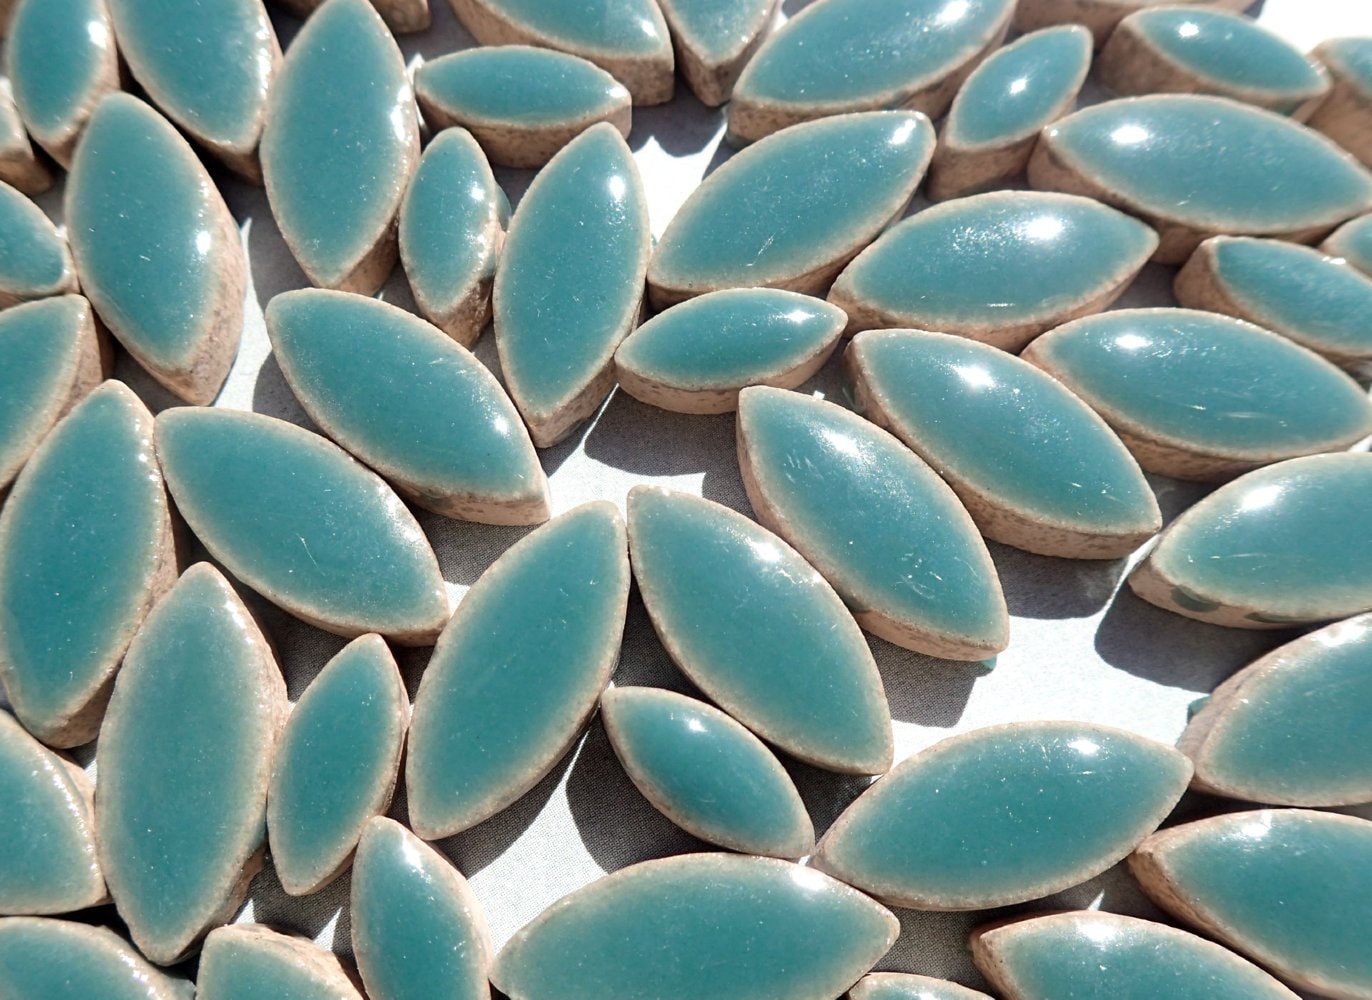 Sea Green Petals Mosaic Tiles - 50g Ceramic Leaves in Mix of 2 Sizes 1/2" and 3/4" - Phthalo Green